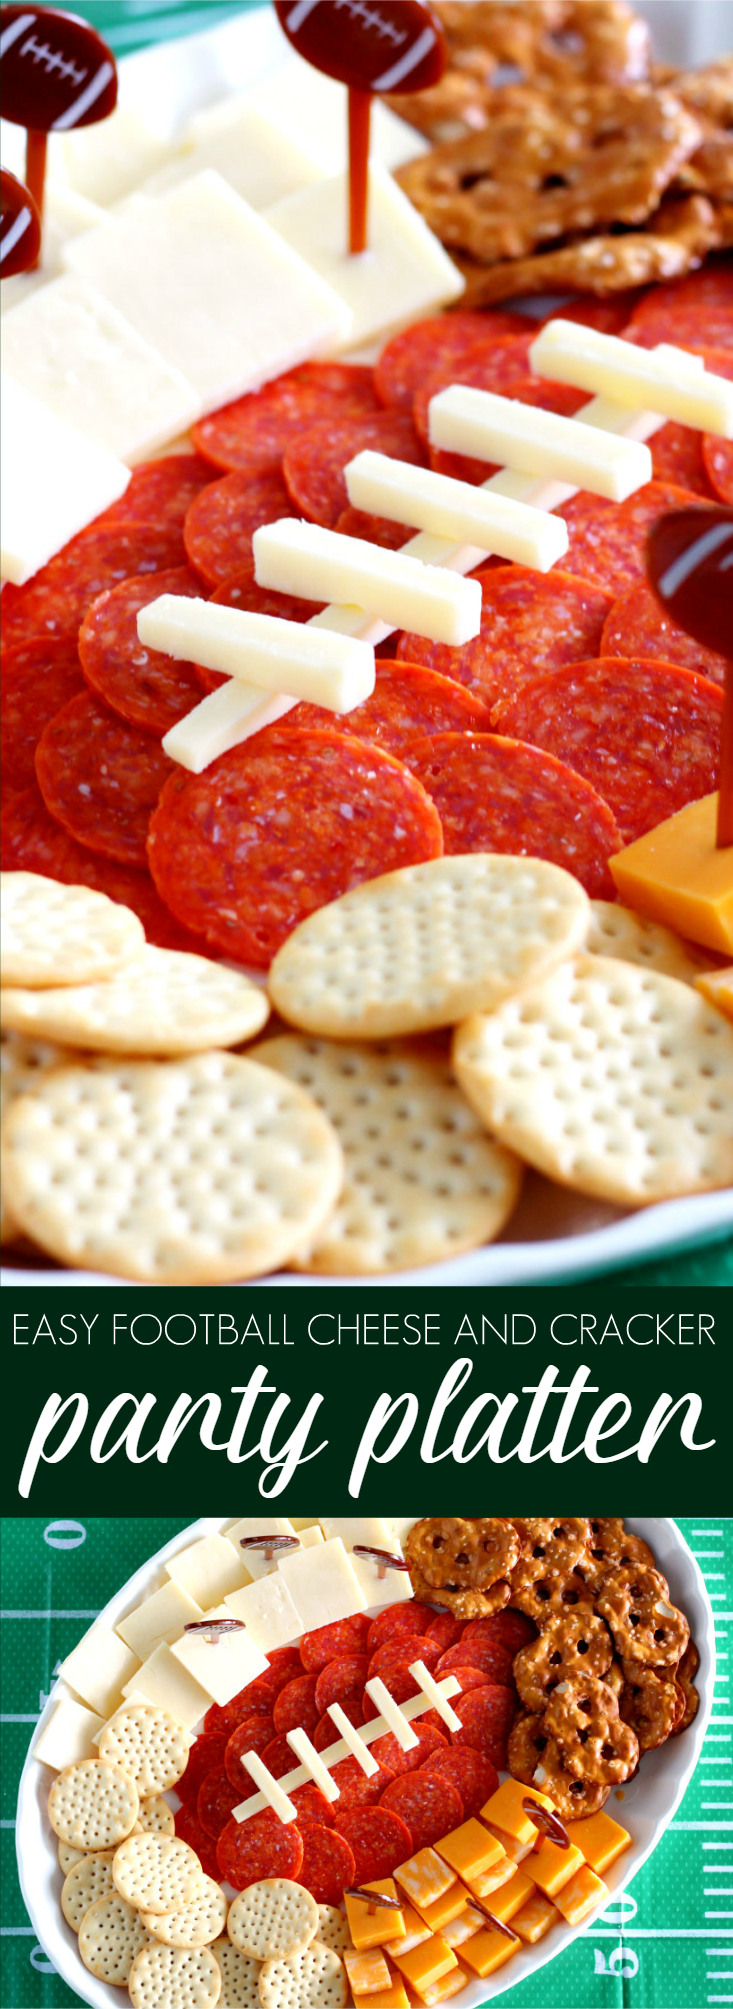 Affordable entertaining during football season isn't that hard when you bust out this Football Charcuterie Platter! This simple tailgating appetizer is sure to score a touchdown with party guests.